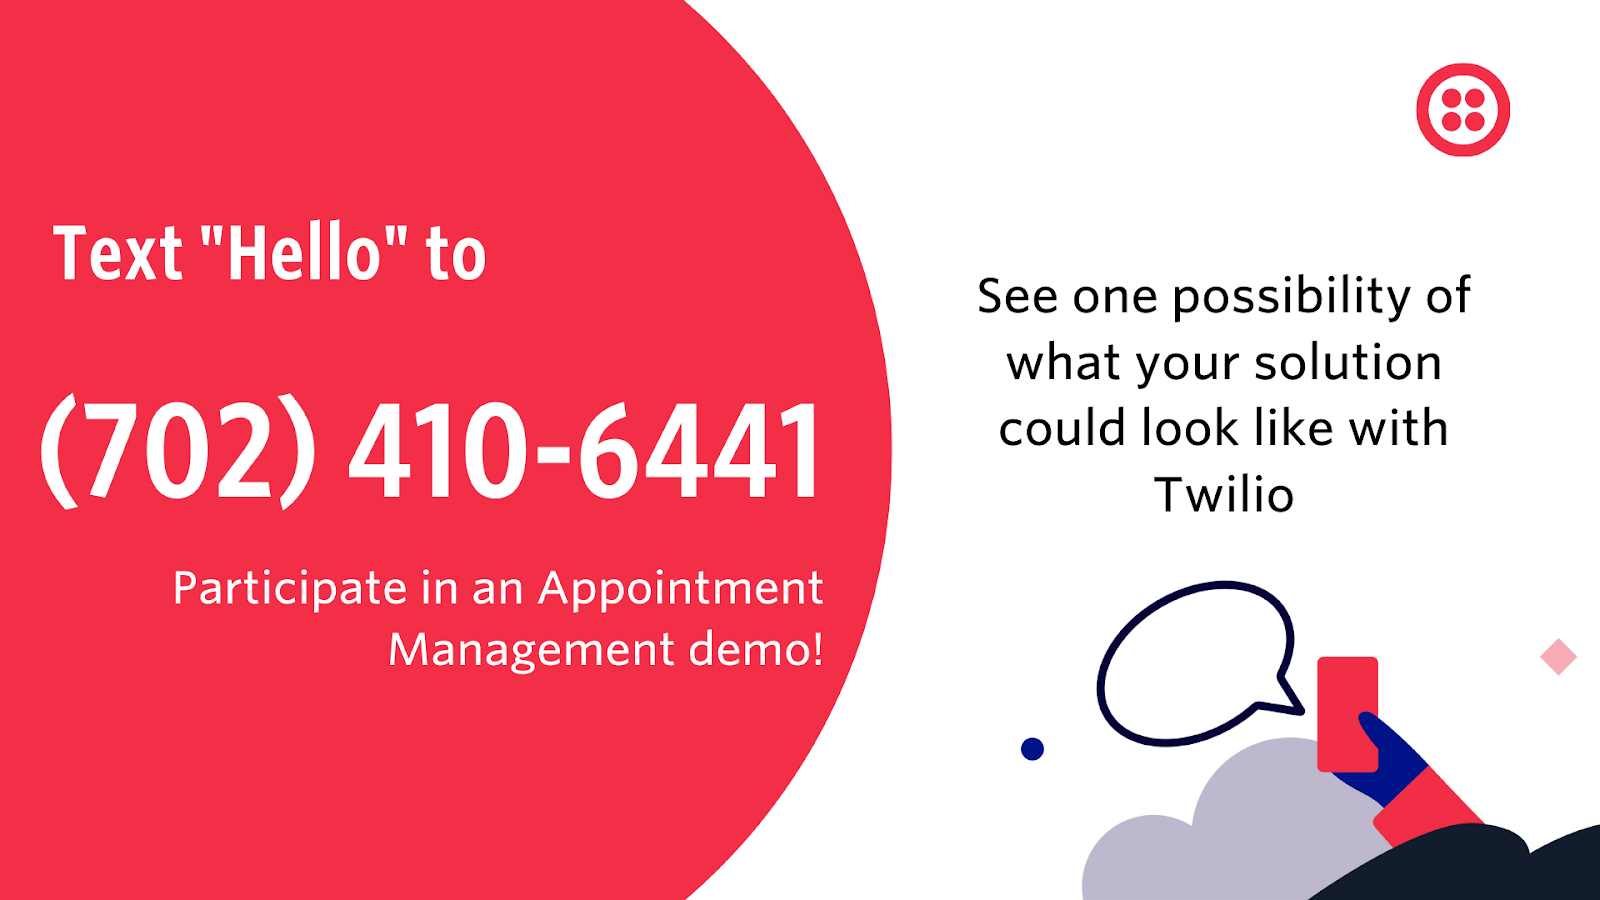 Try the Twilio Appointment Management Demo at HIMSS 2021